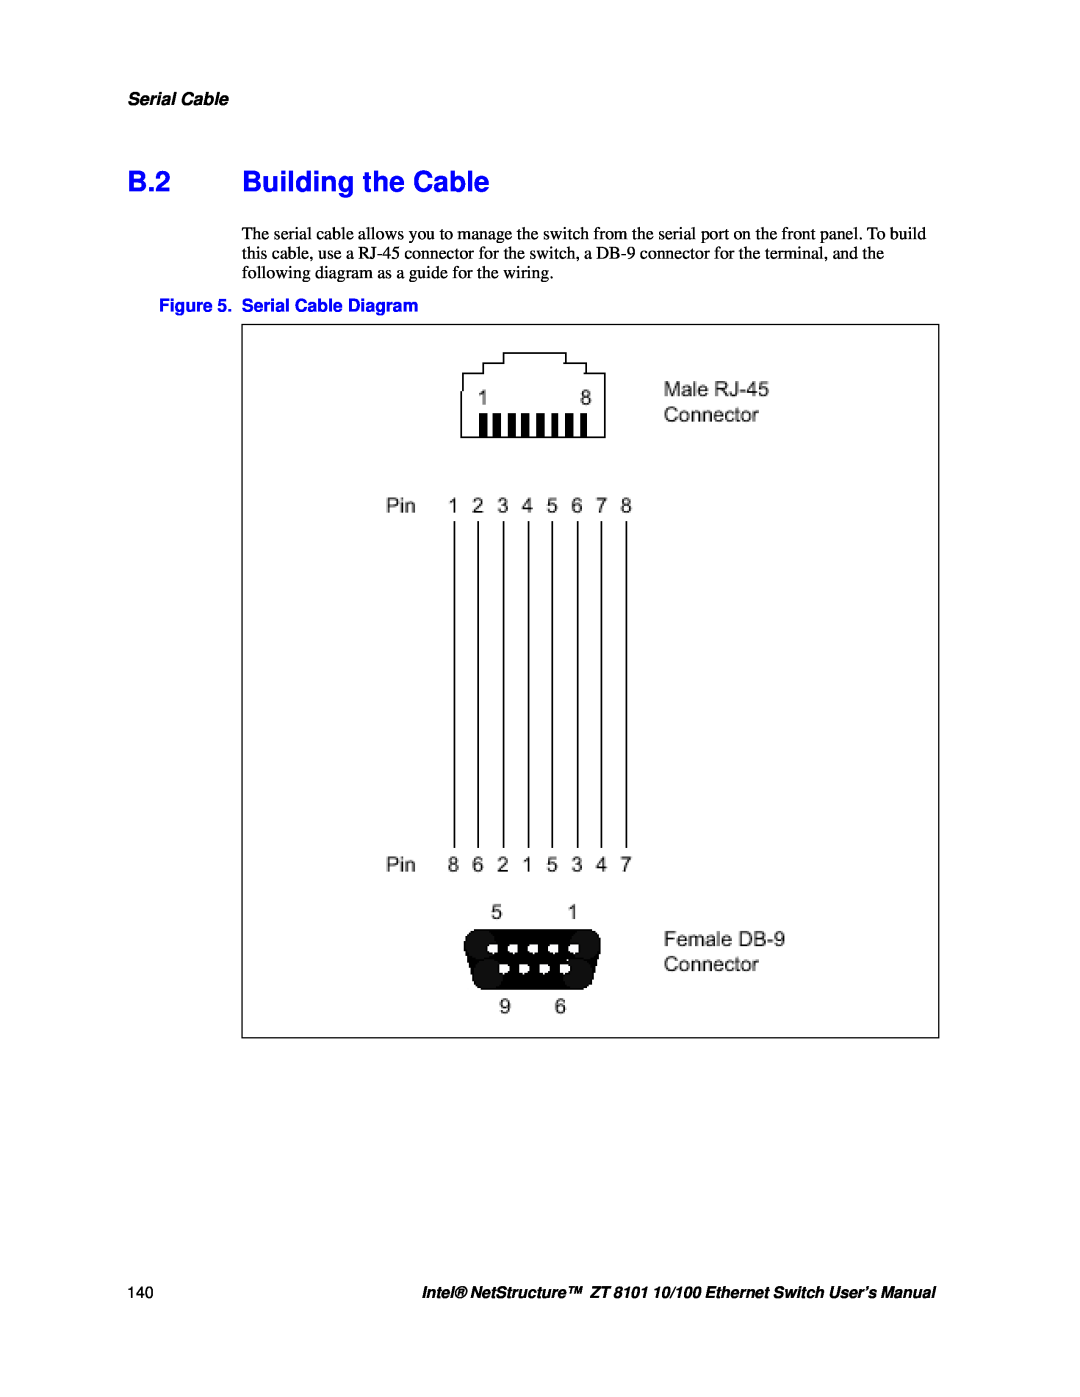 Intel ZT 8101 10/100 user manual B.2 Building the Cable, Serial Cable Diagram 